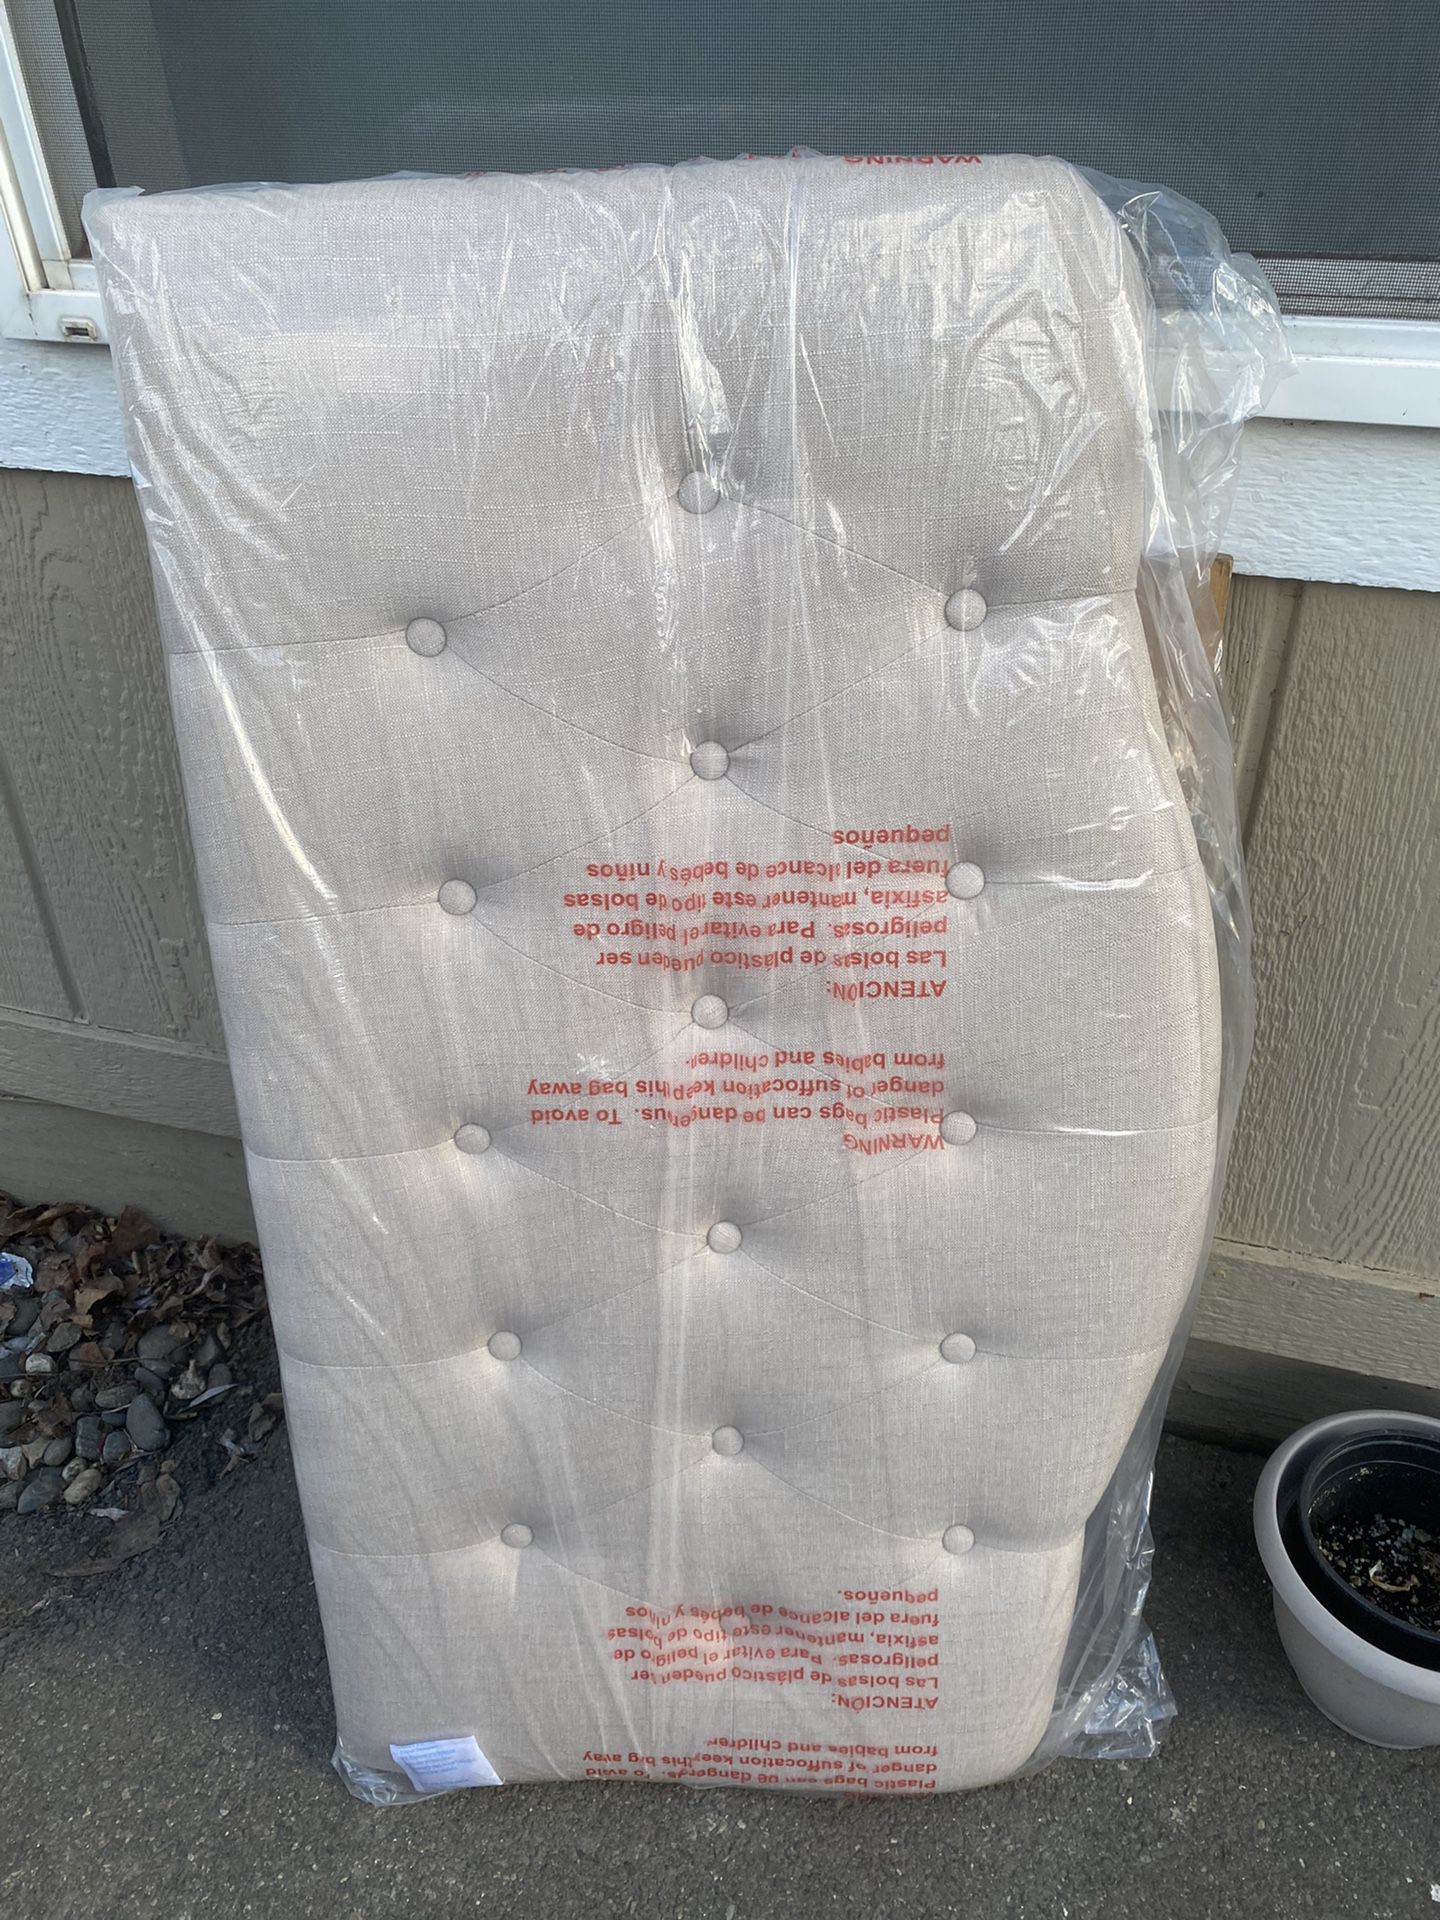 $125-(firm price) brand new still in package wrap-Beige color twin size headboard new in package-I bought from amazon aug 2020 but never did open it t